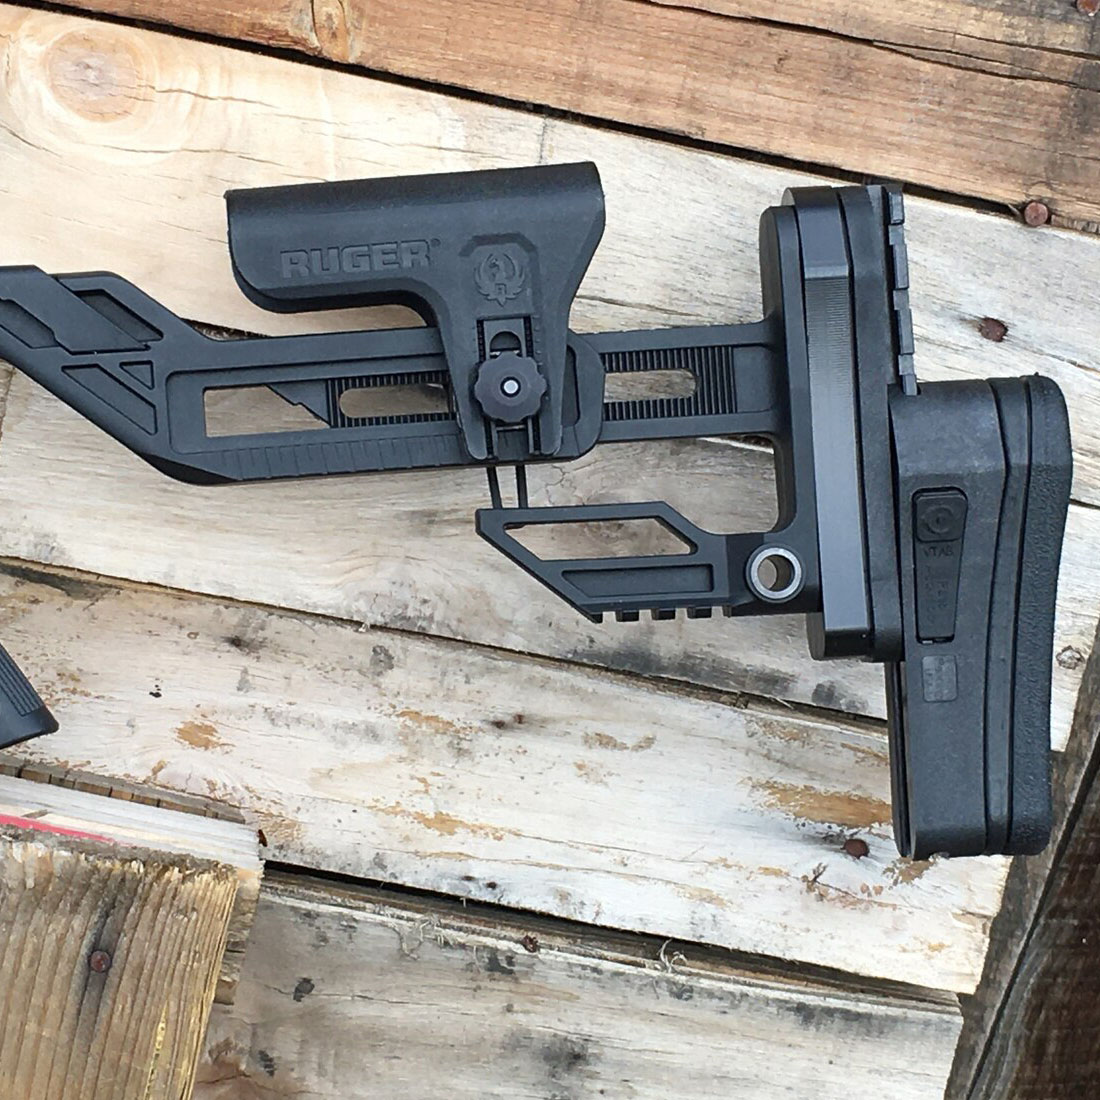 Will this mount directly to the Ruger Precision Rimfire by simply removing the factory butt pad?